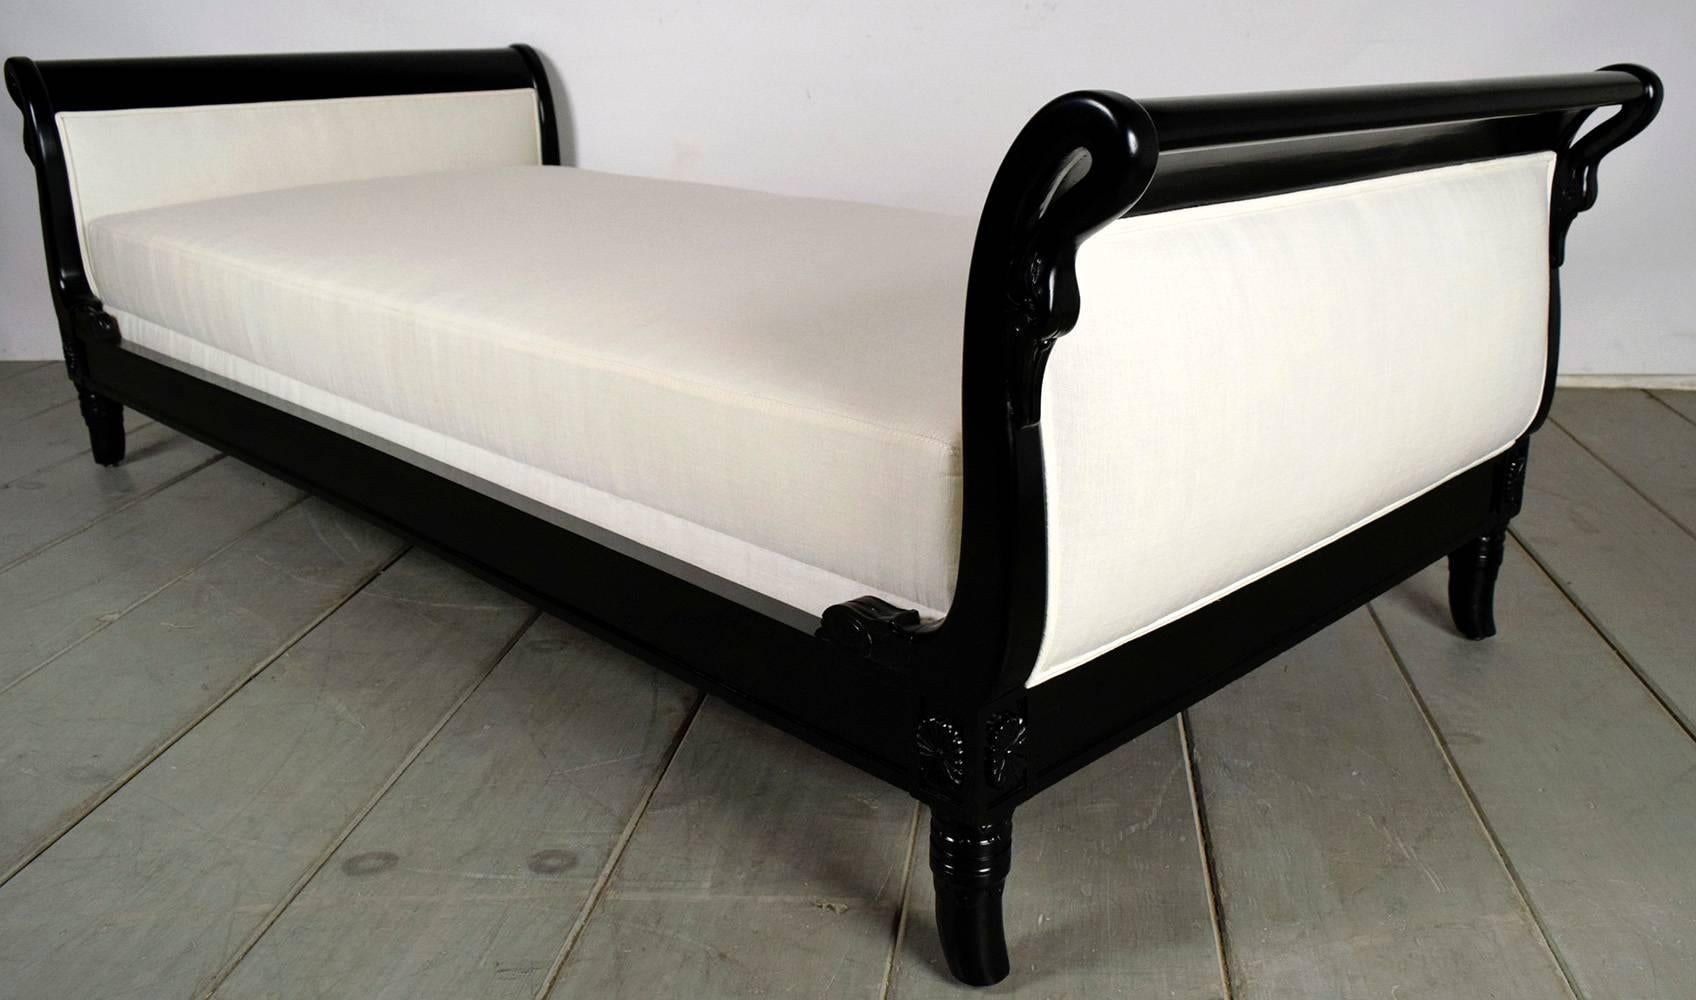 Elegant Empire daybed. Solid mahogany wood frame newly finished in a rich black color. Scroll design headboards with swan carvings. Newly upholstered headboards with double piping trims and new cushion in an ivory color linen fabric all done by a